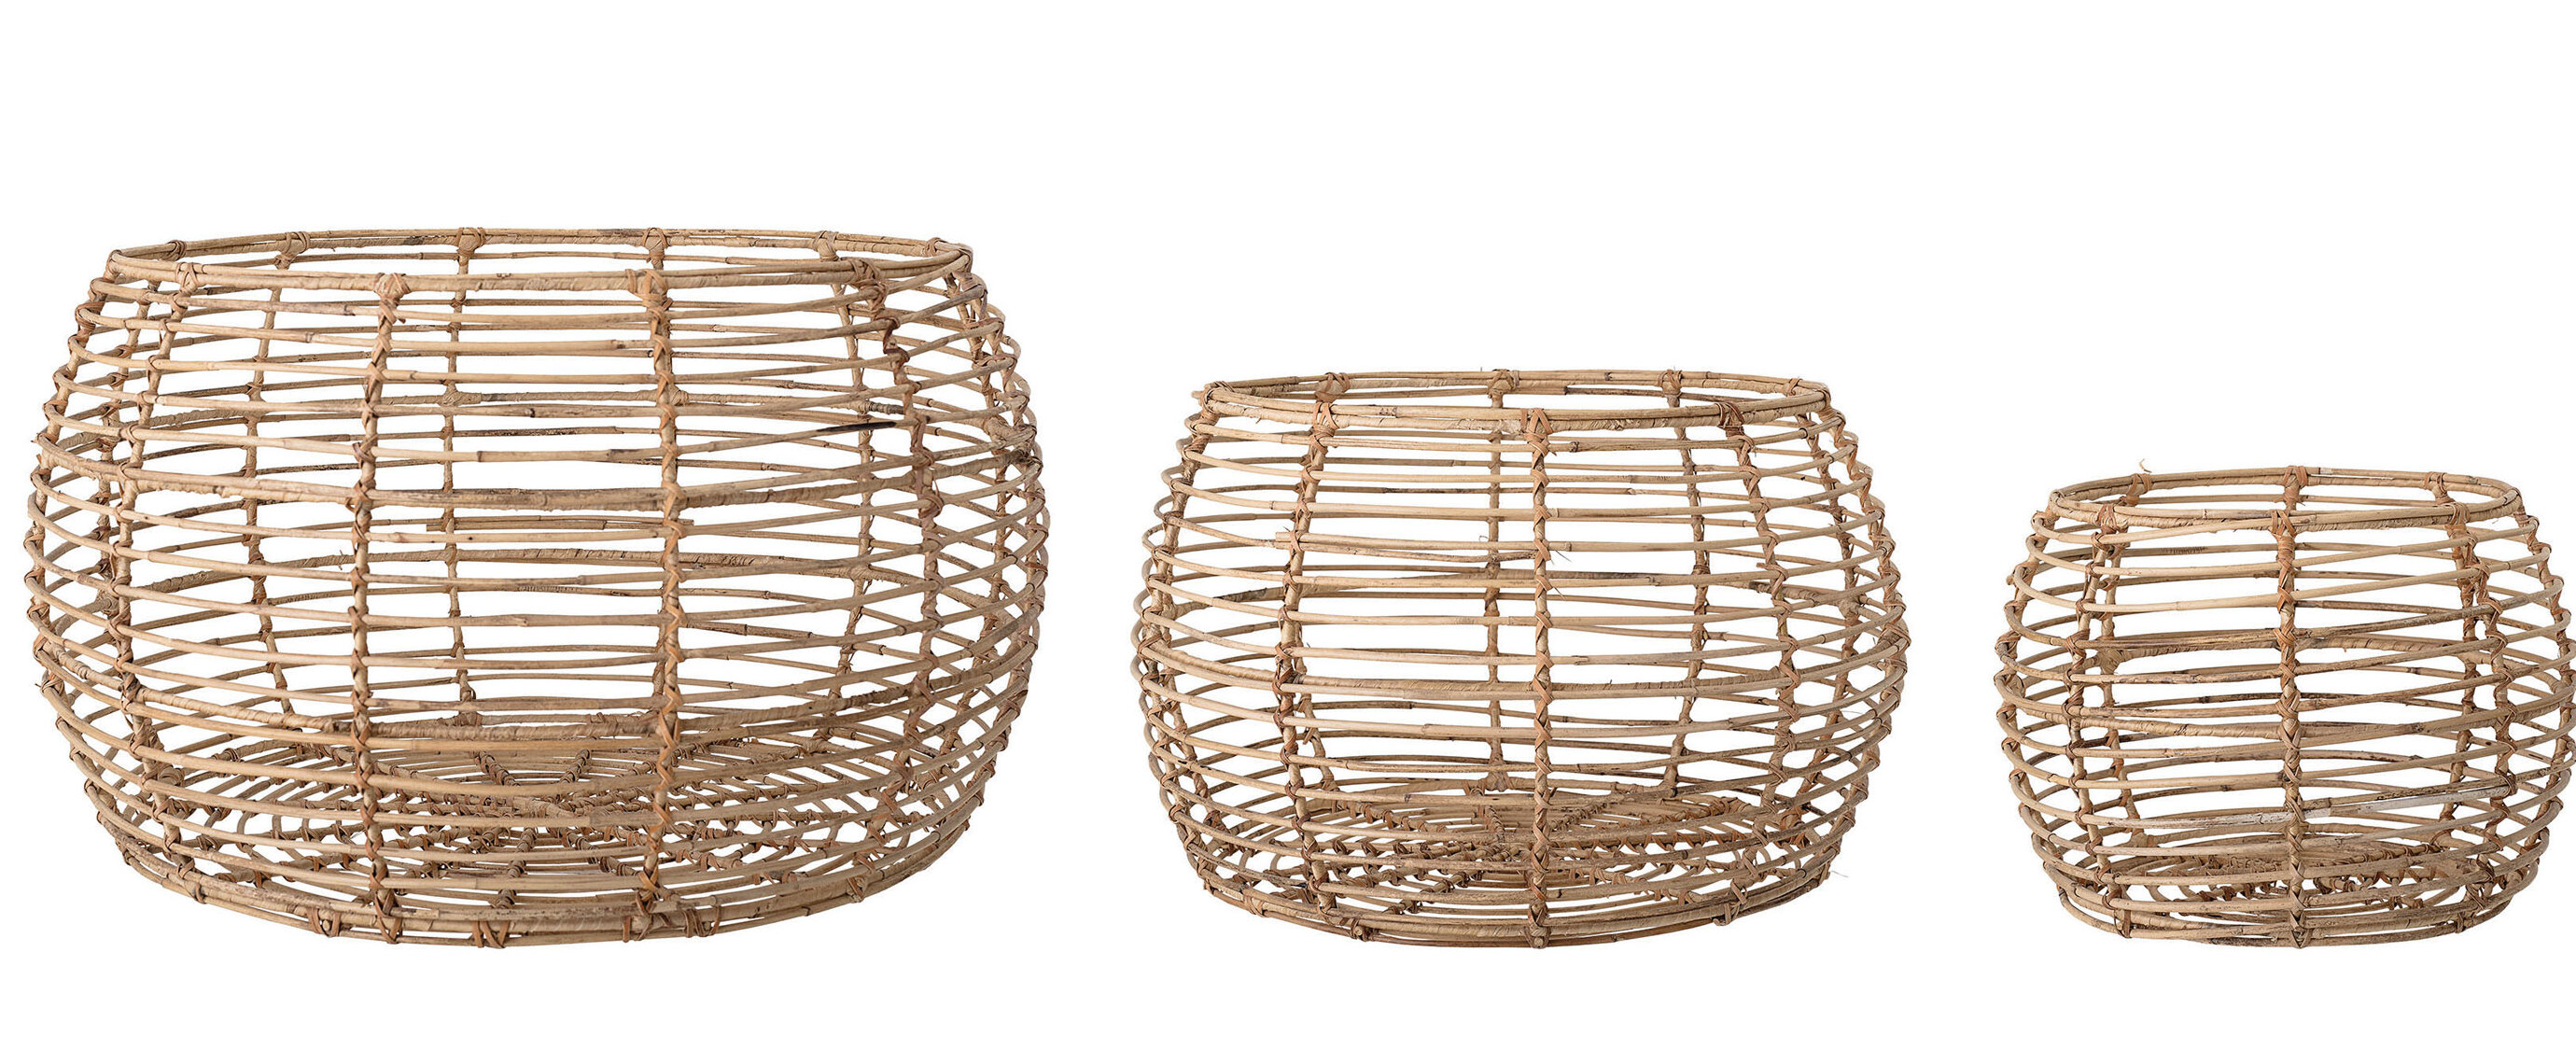 Details about   Hand Woven Intricate Weaved Rattan Baskets3 Sizes 